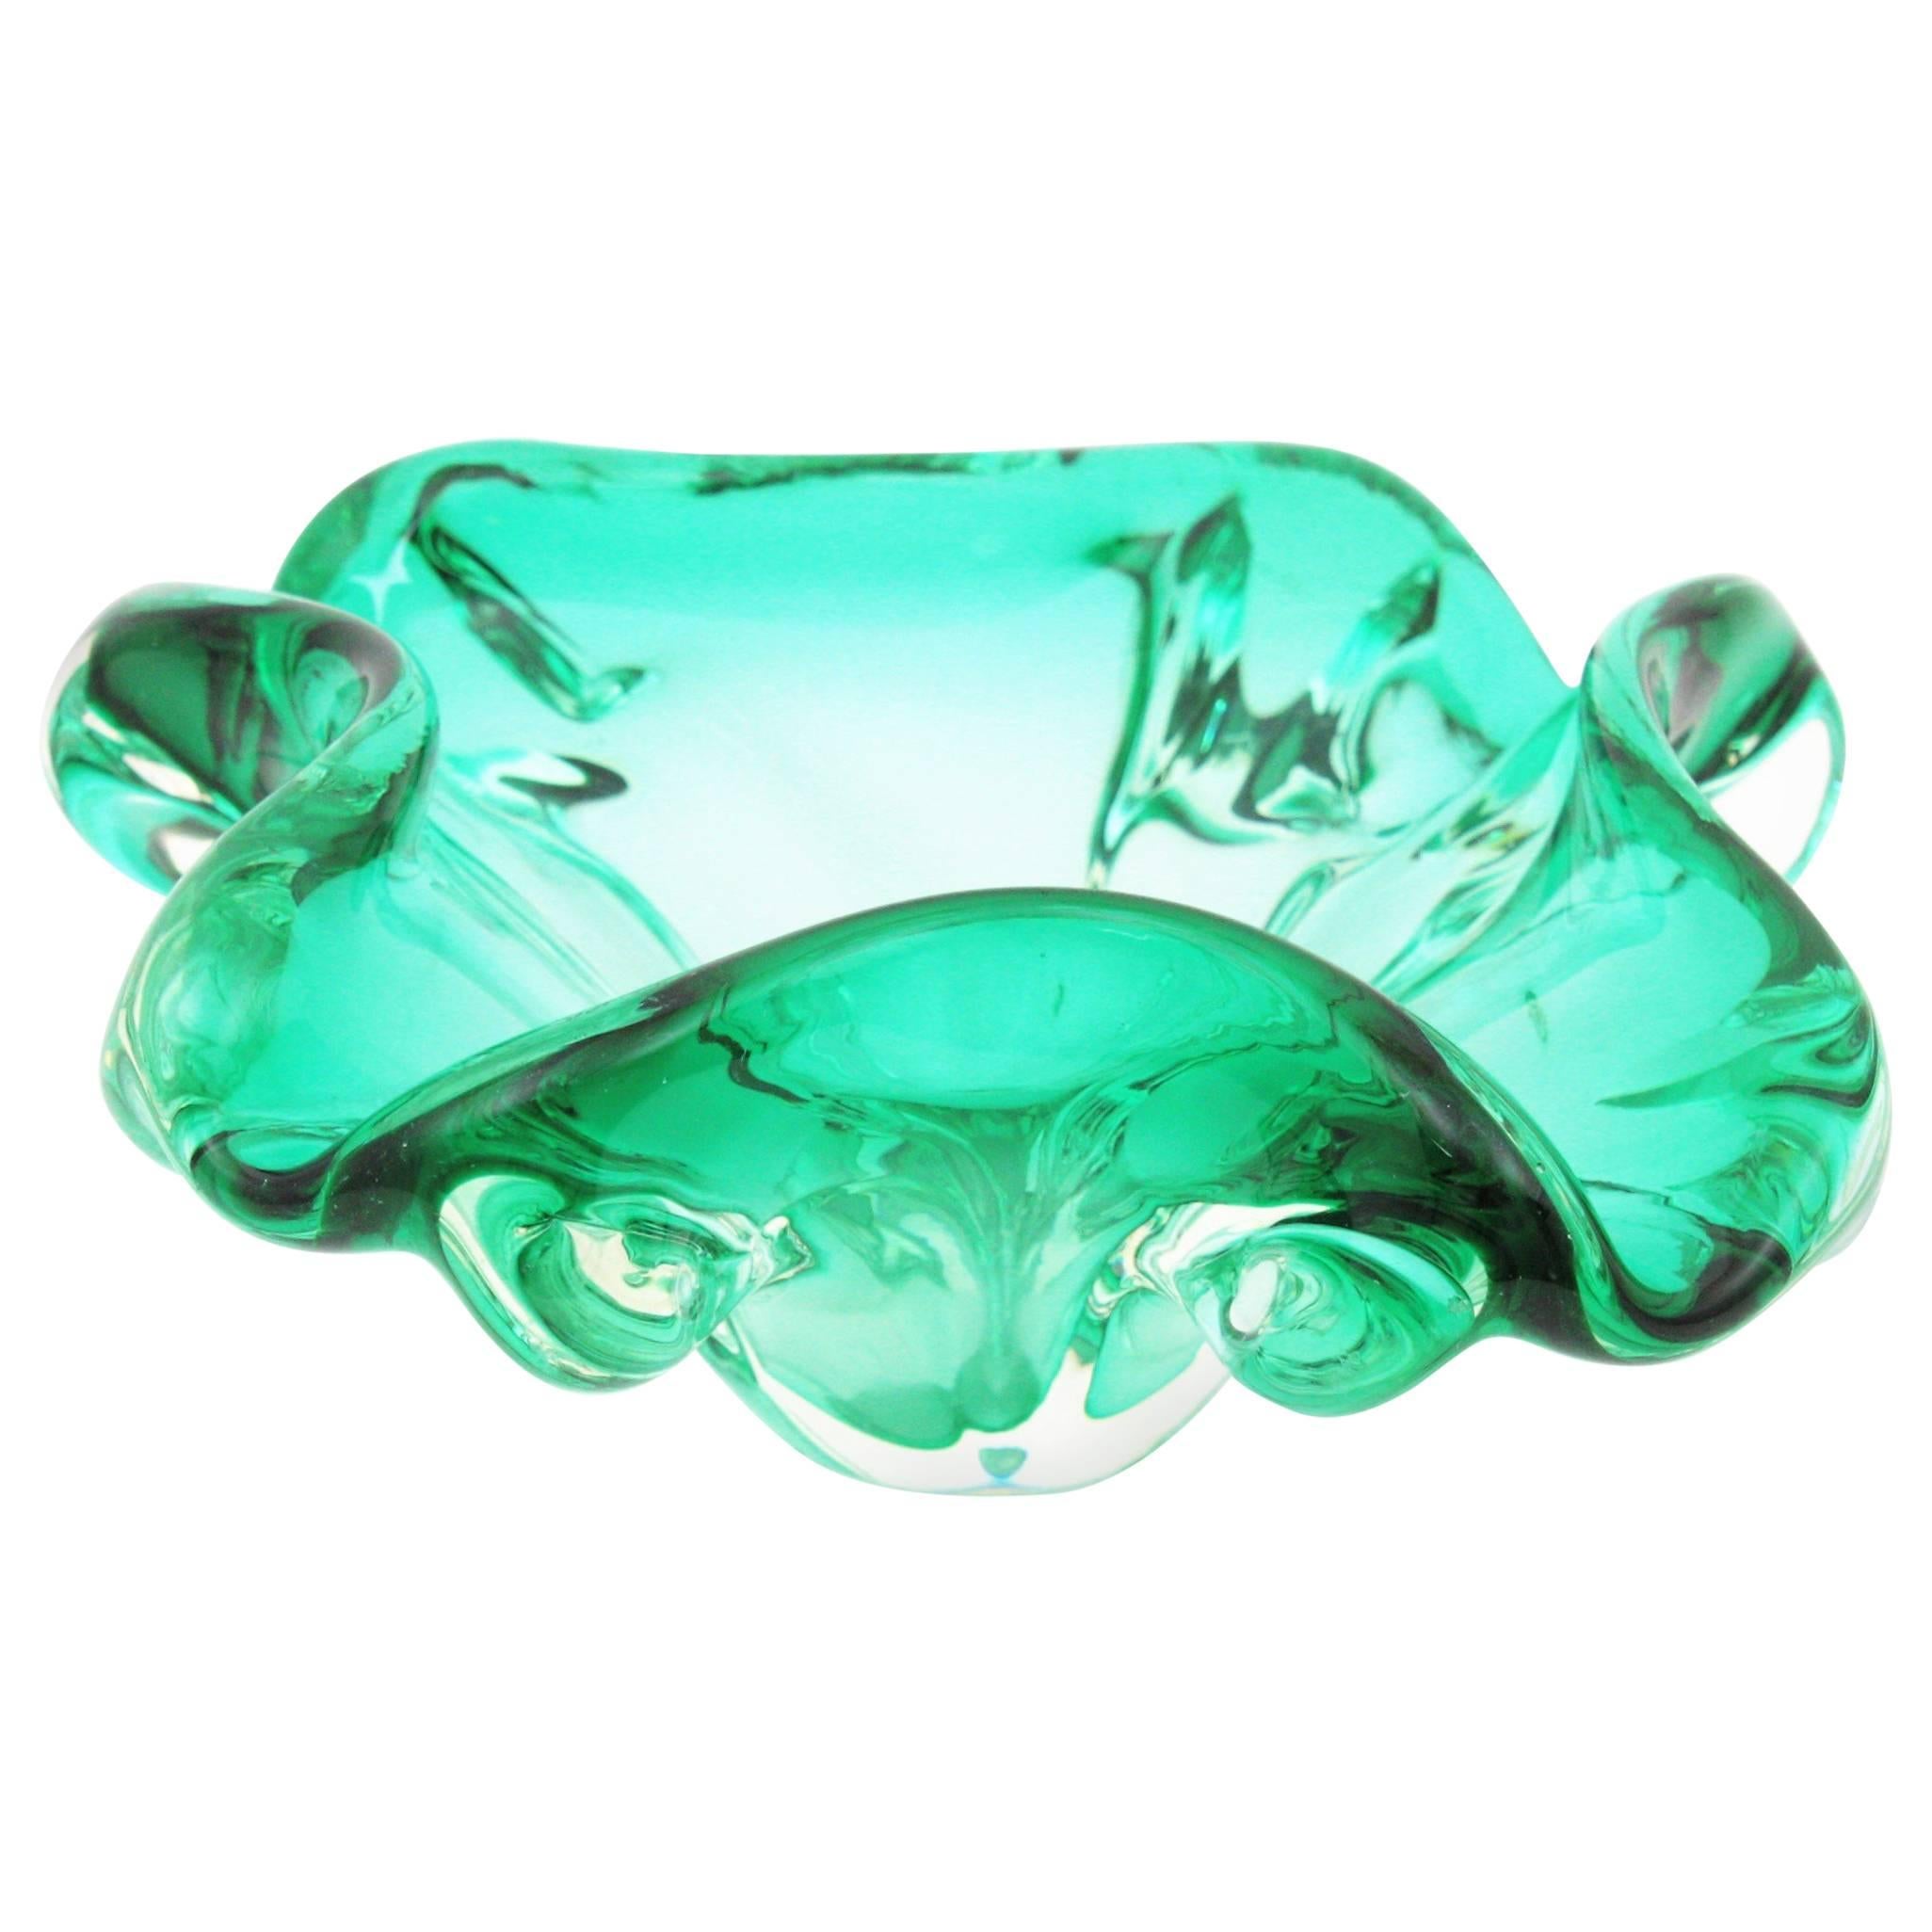 Beautiful and colorful Aquan green Murano glass bowl with flower shape. Italy, 1960s.
It has a gradient of shades of green to clear glass and organic shapes.
A highly decorative piece when light goes down on it.
Useful as bowl, ashtray or